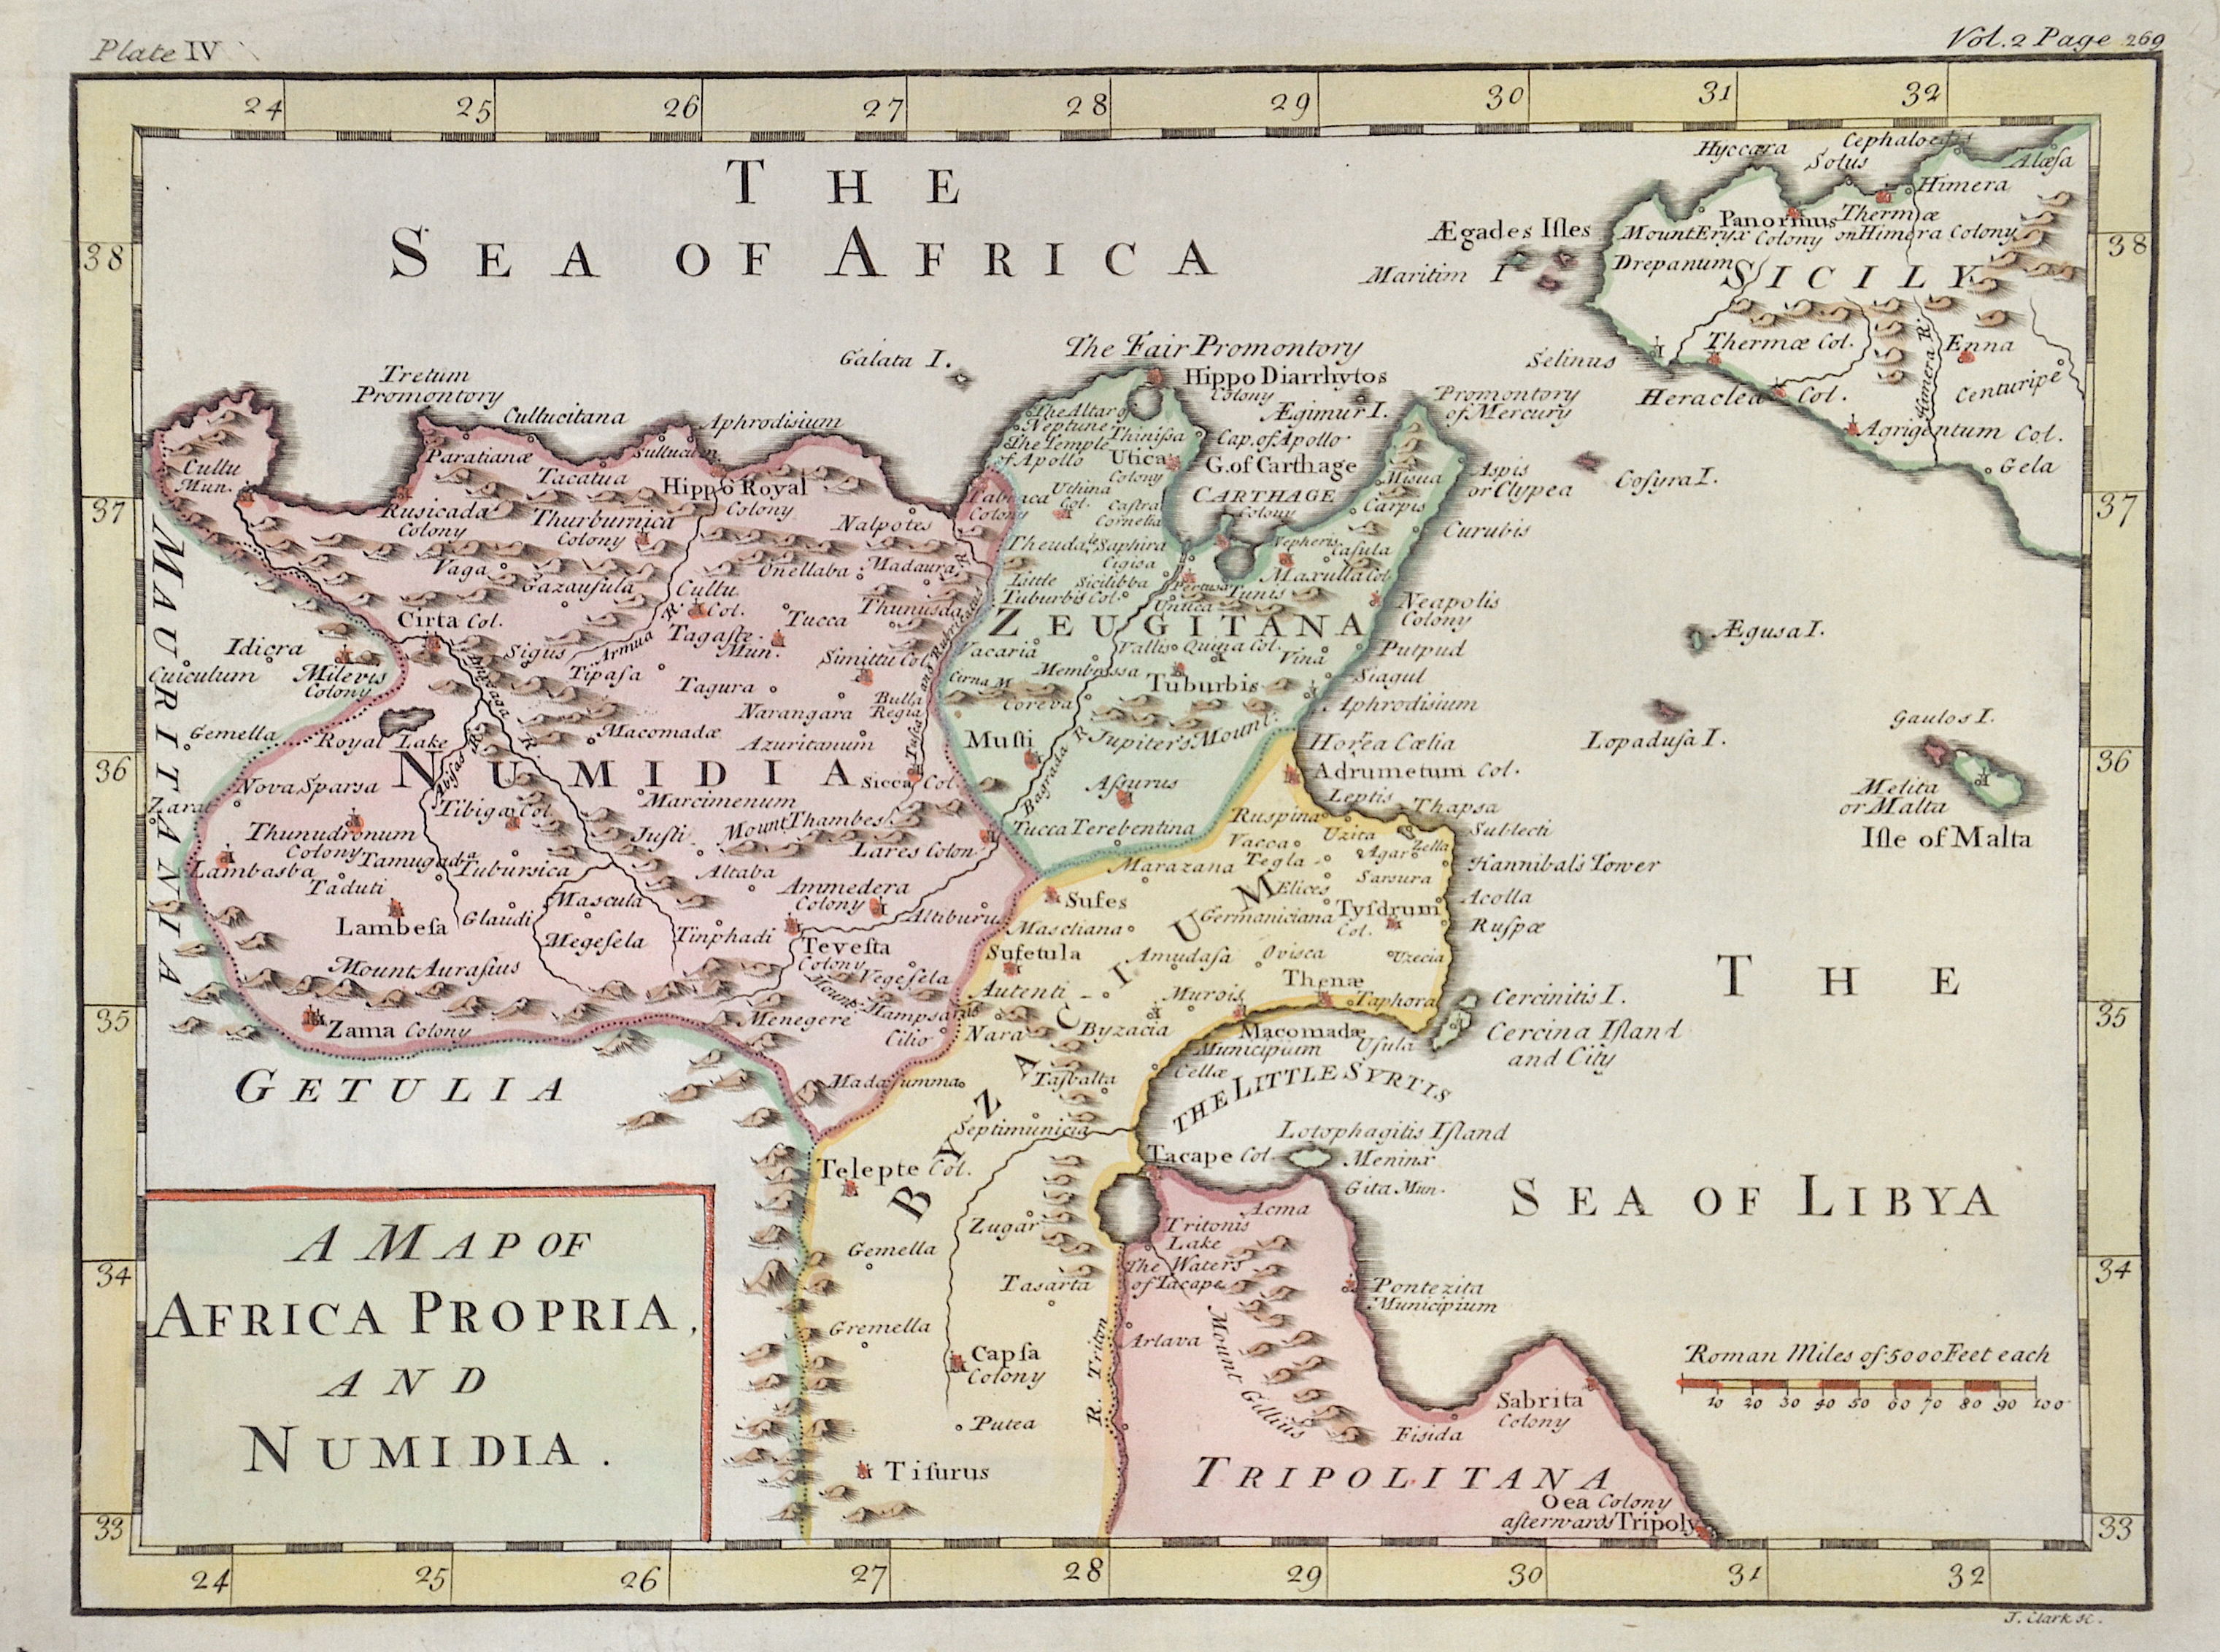 Clark J. A Map of Africa Propria, and Numidia.